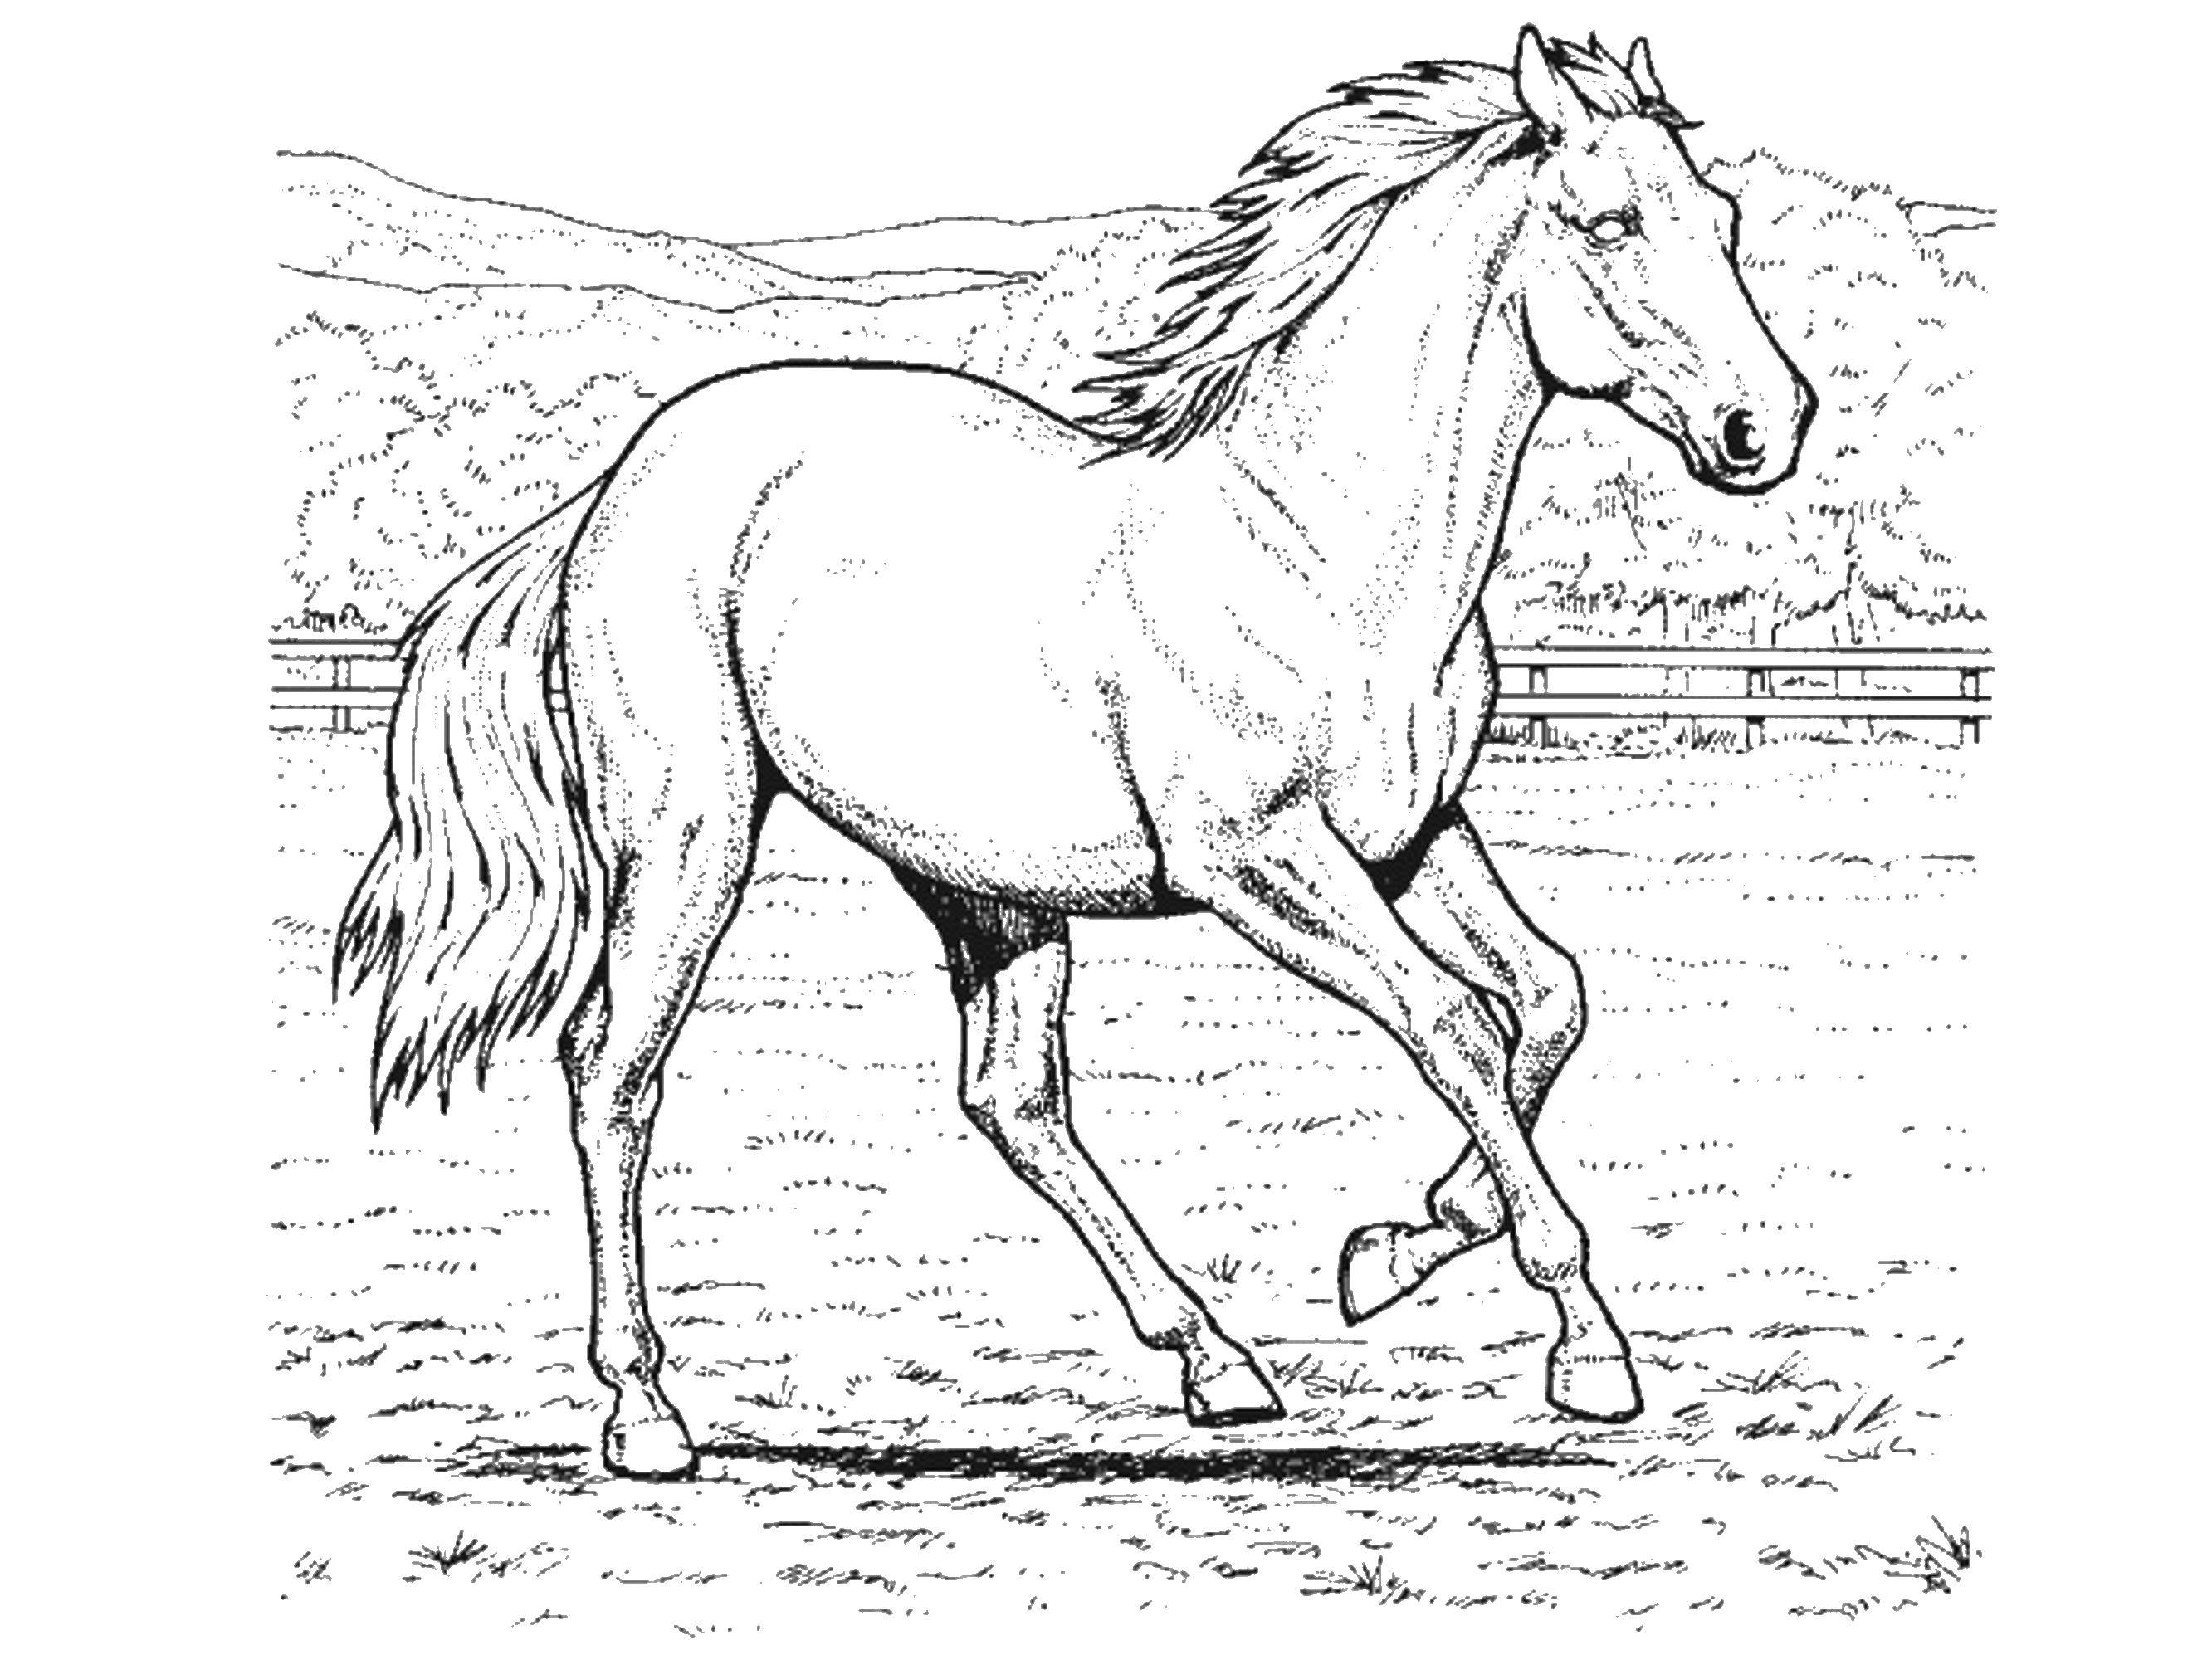 Coloring The horse runs. Category Pets allowed. Tags:  horse.